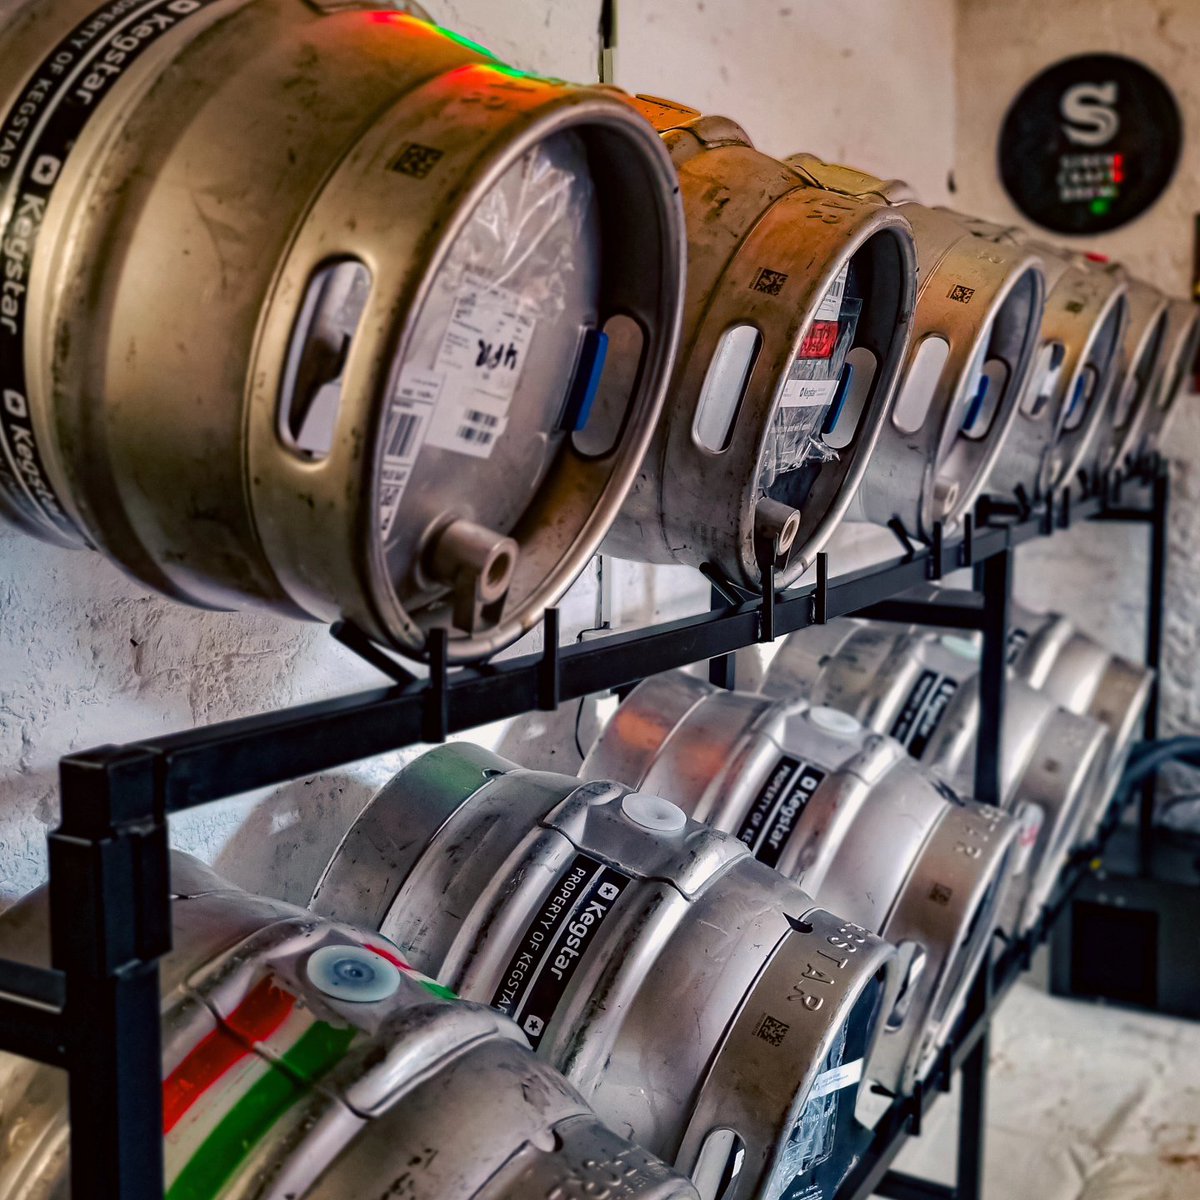 Cask Beer! We love it. We love drinking it. We love serving it. This year, so far, we've served up over 88 Casks from Bitters to Stouts, Pales to Sours, and we are only just getting started. Expect more Cask Weekends, more Three Hounds Casks and lots more pints of the good stuff